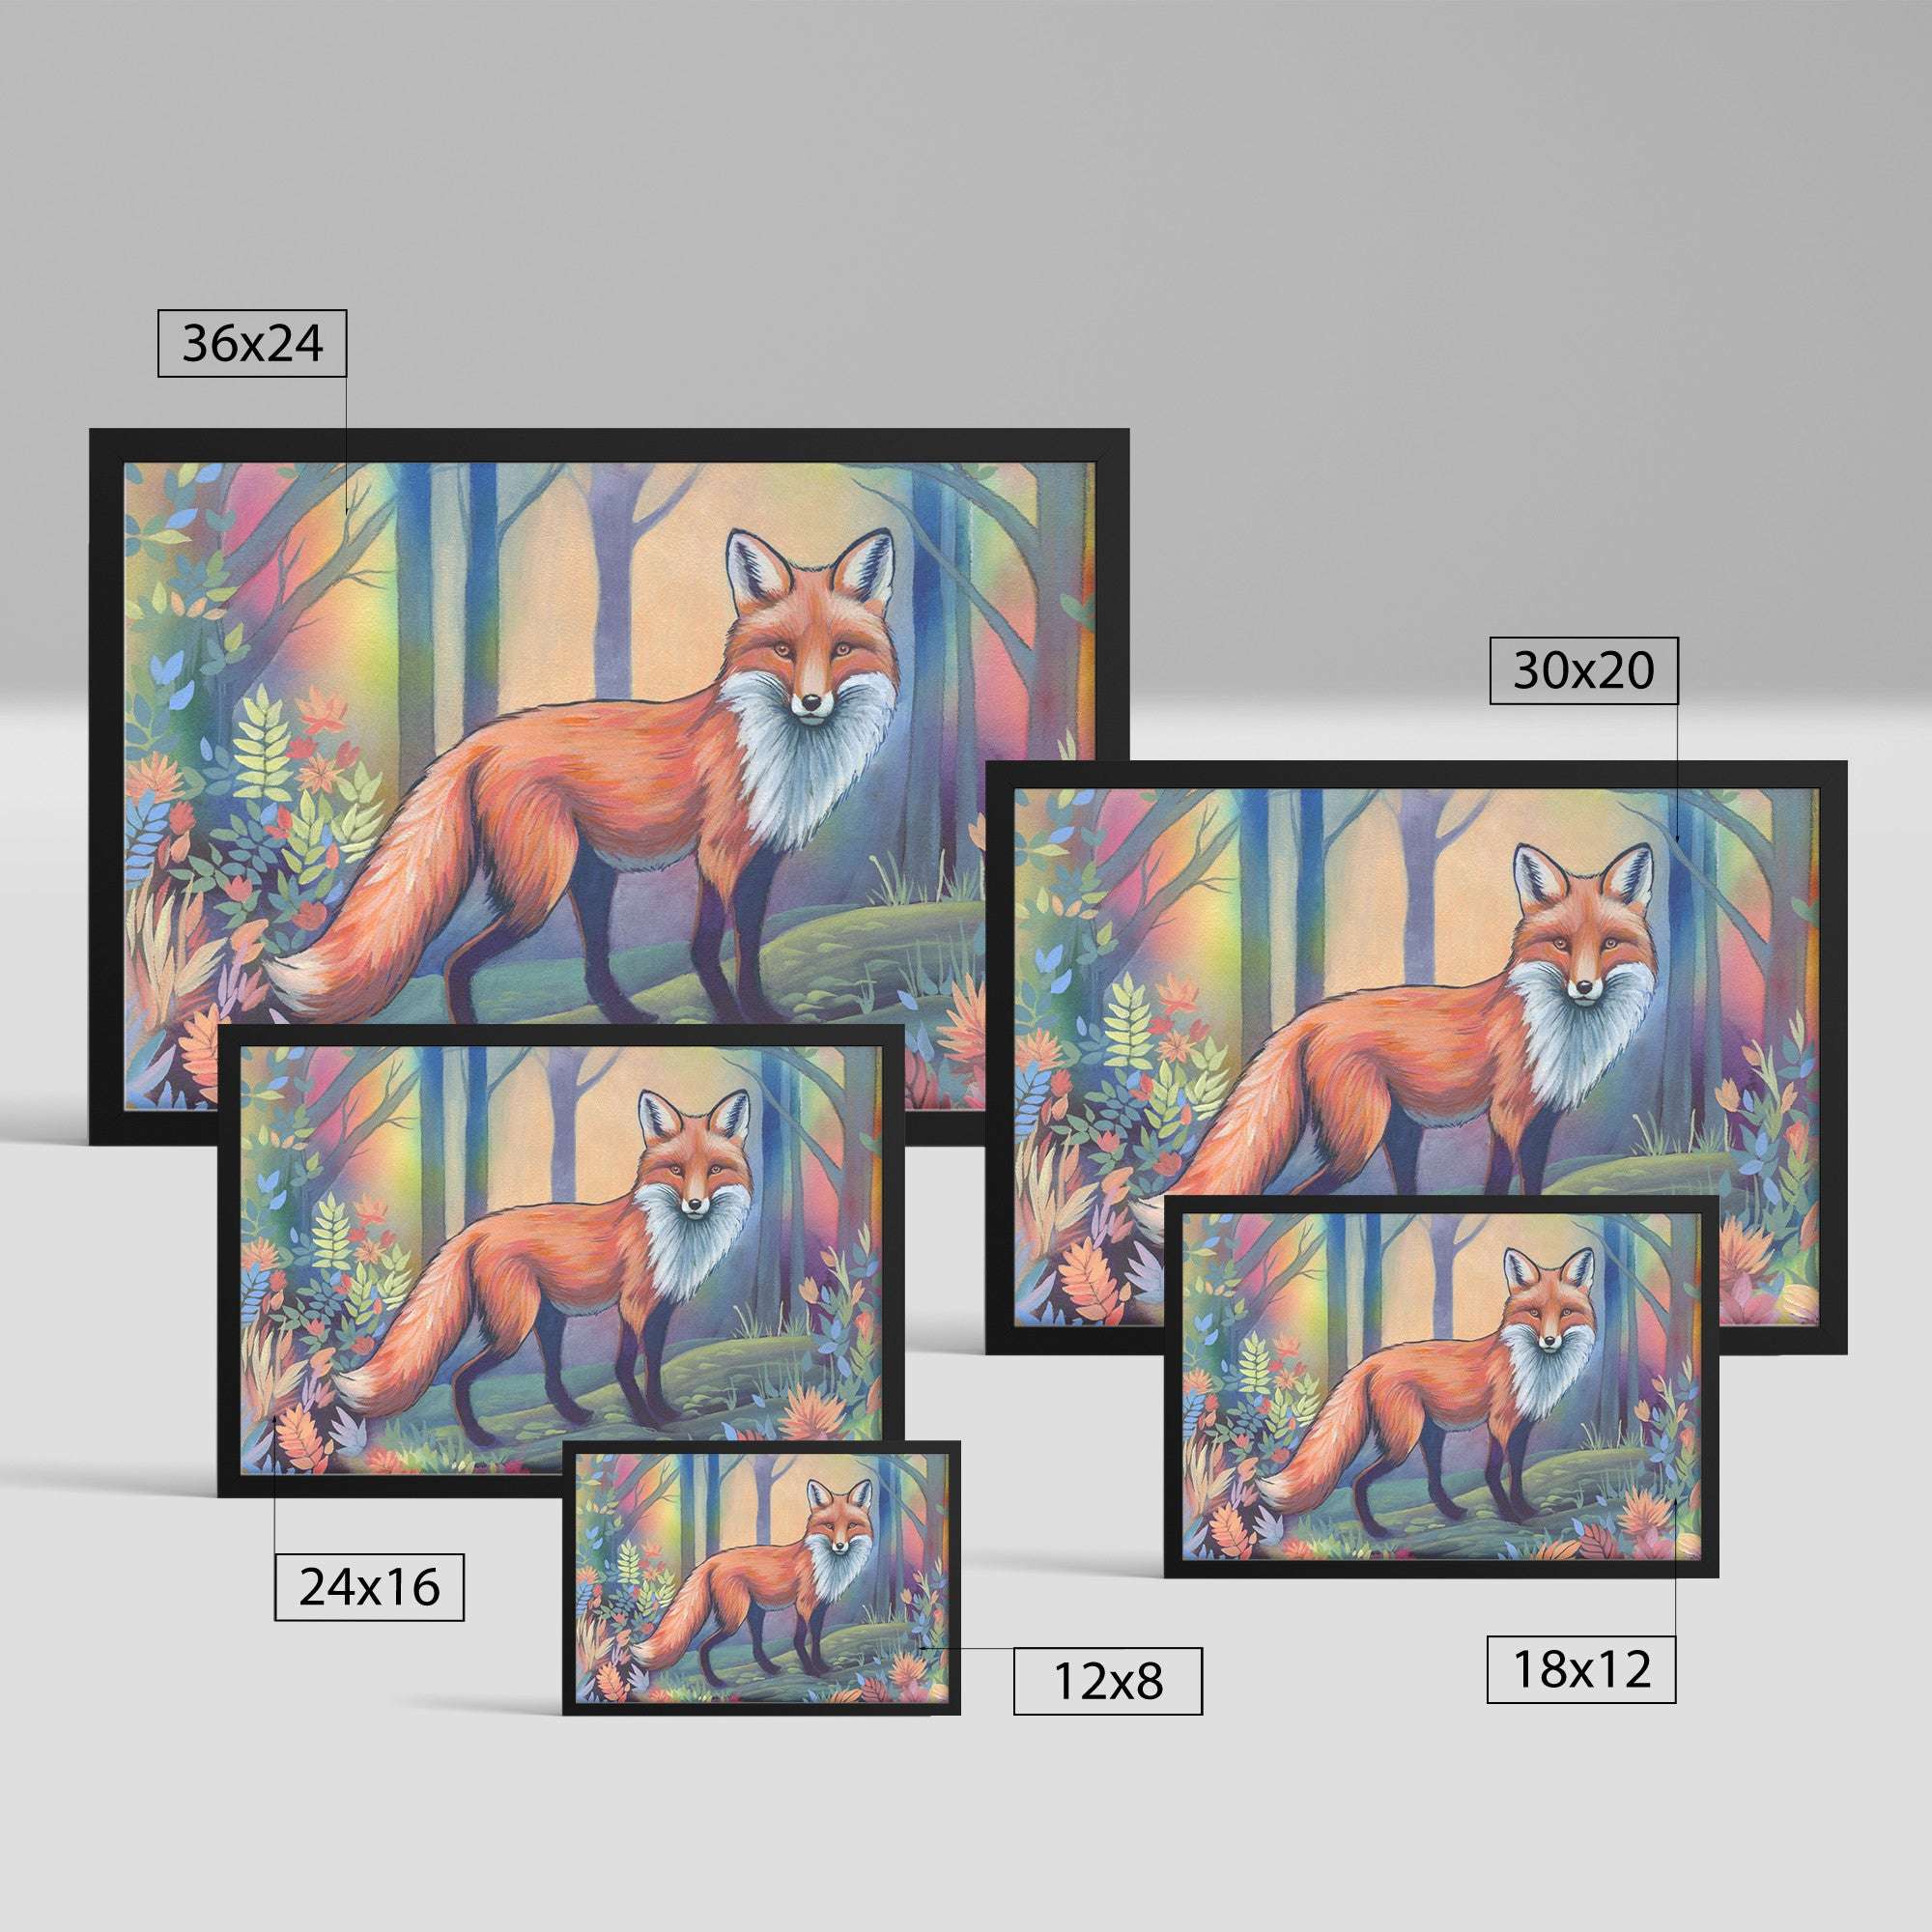 Various sizes of a Framed Fox Art Print depicting a fox in a colorful forest, displayed for comparison, labeled with their dimensions.